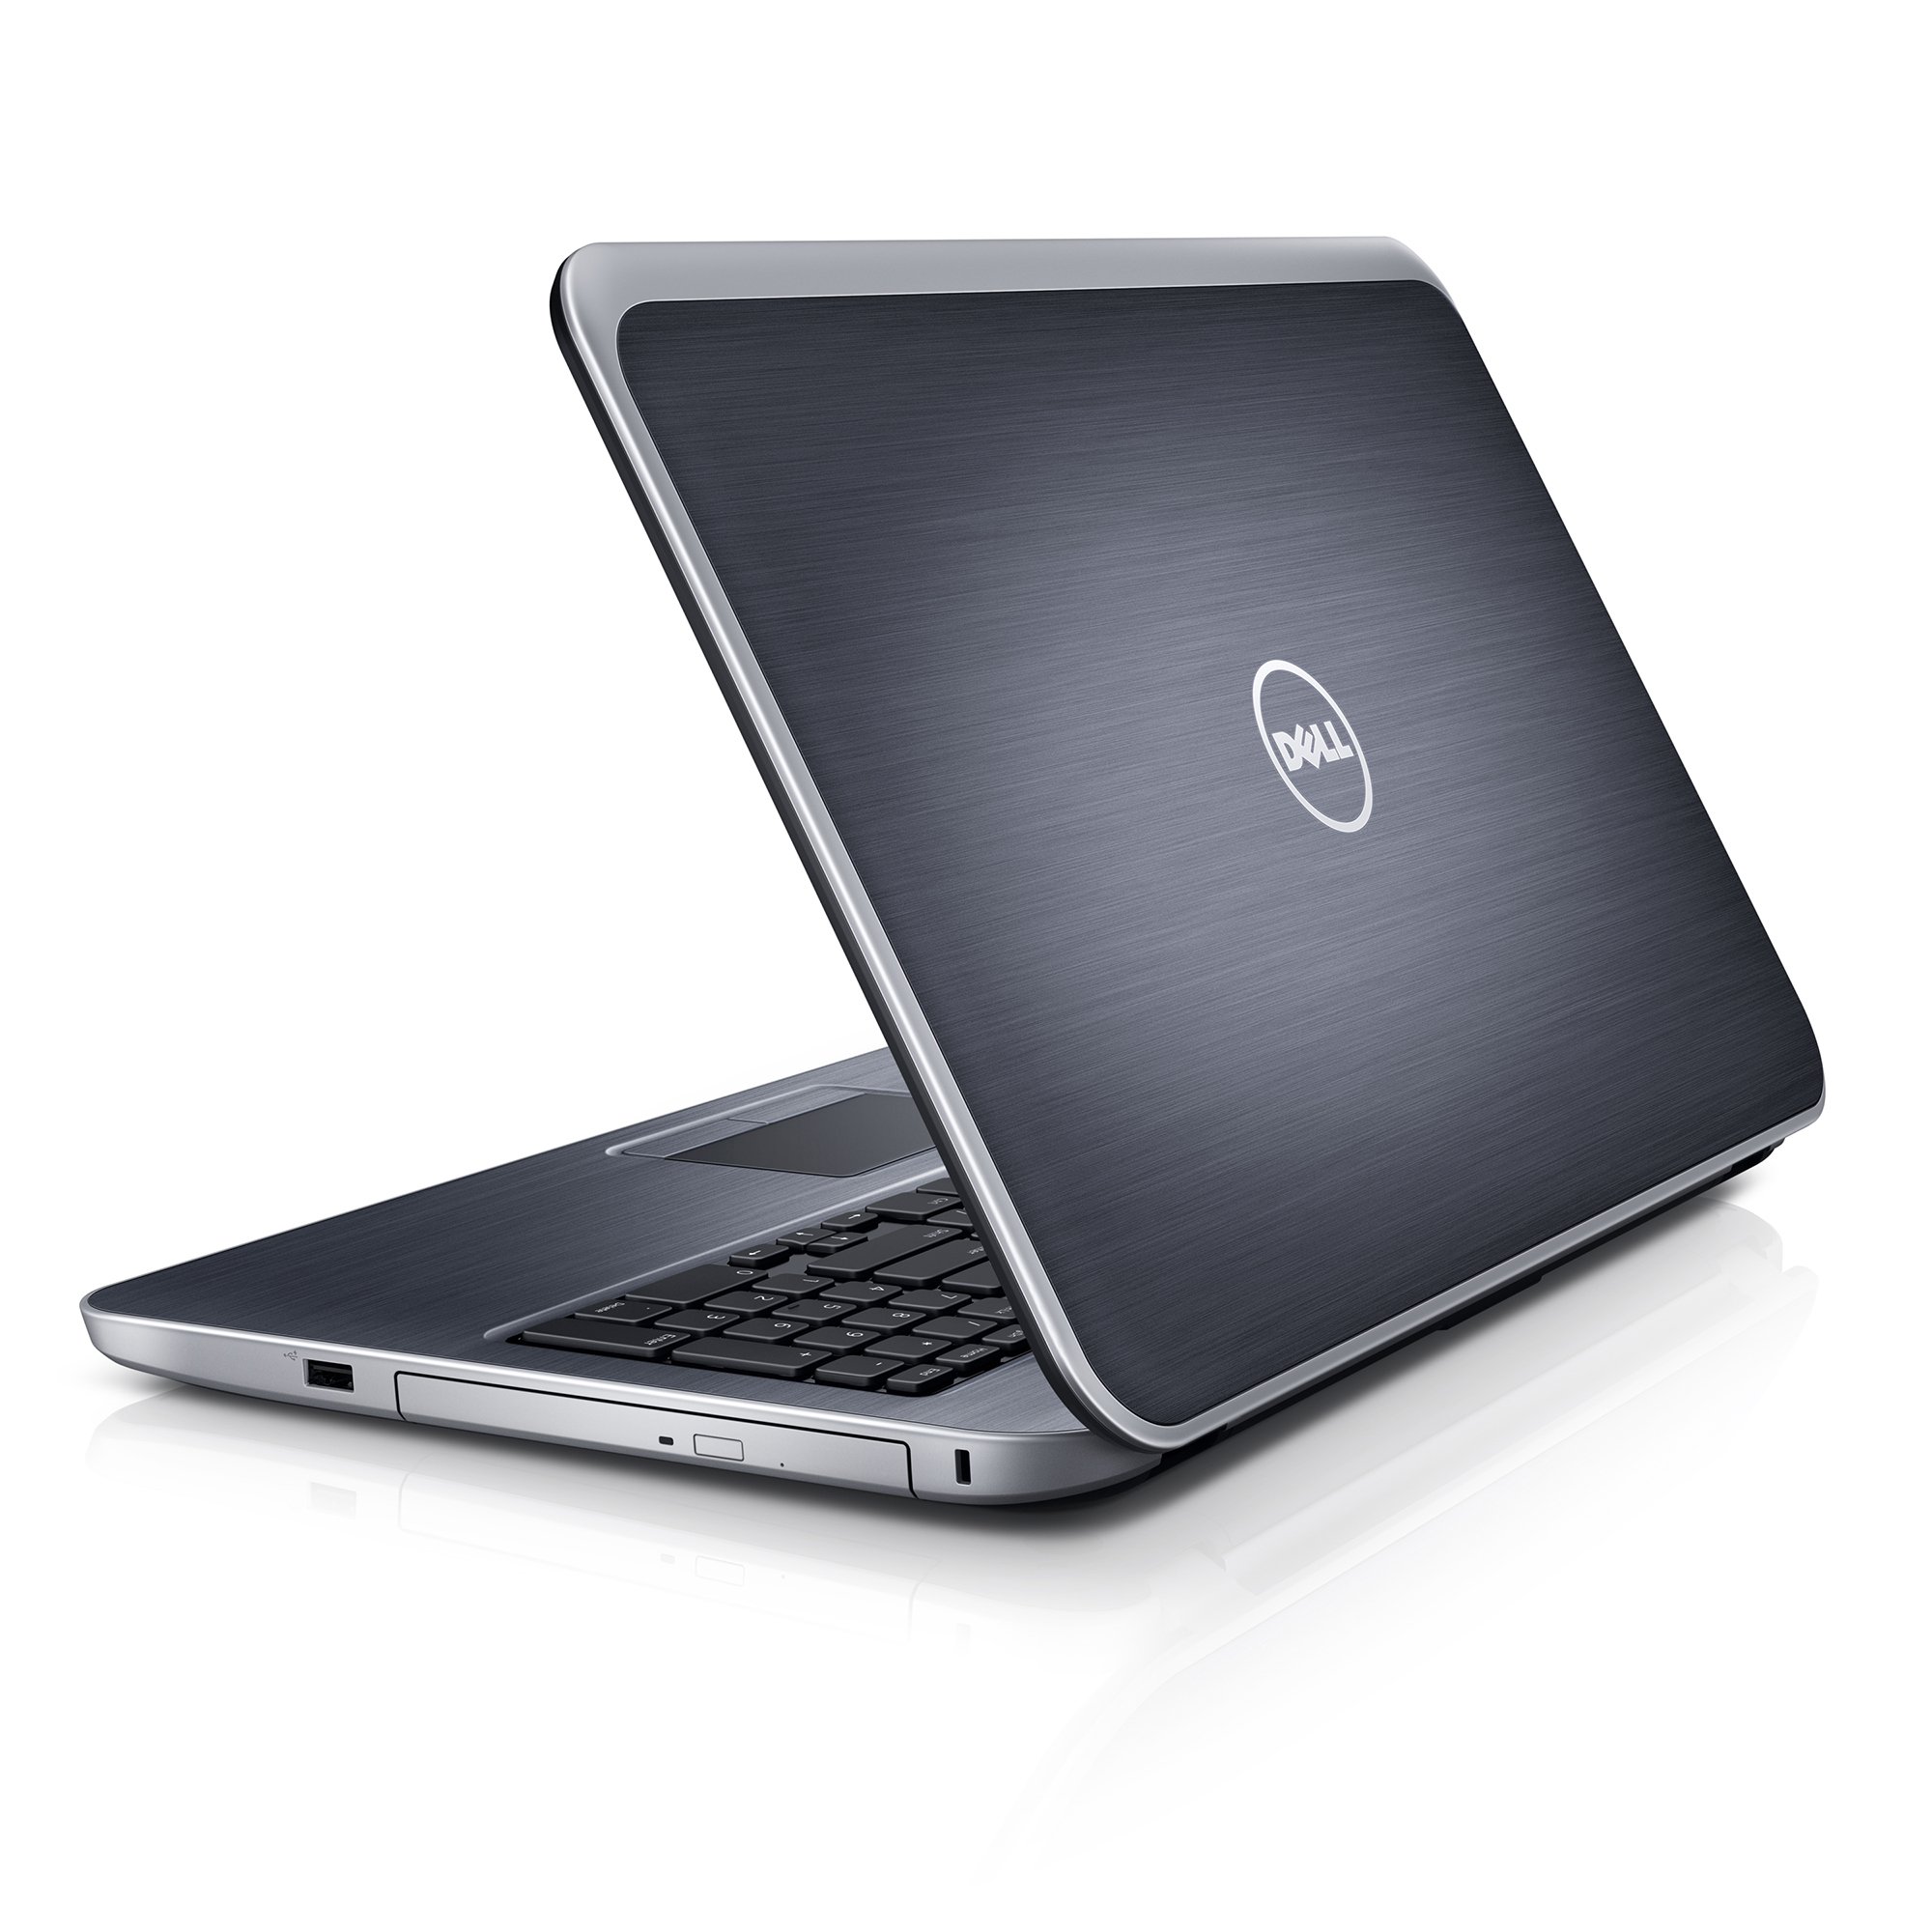 Provide the necessary details about your Dell Inspiron 1525 and describe the issue of it turning off unexpectedly.
Follow any troubleshooting steps or solutions provided by the Dell support representative.